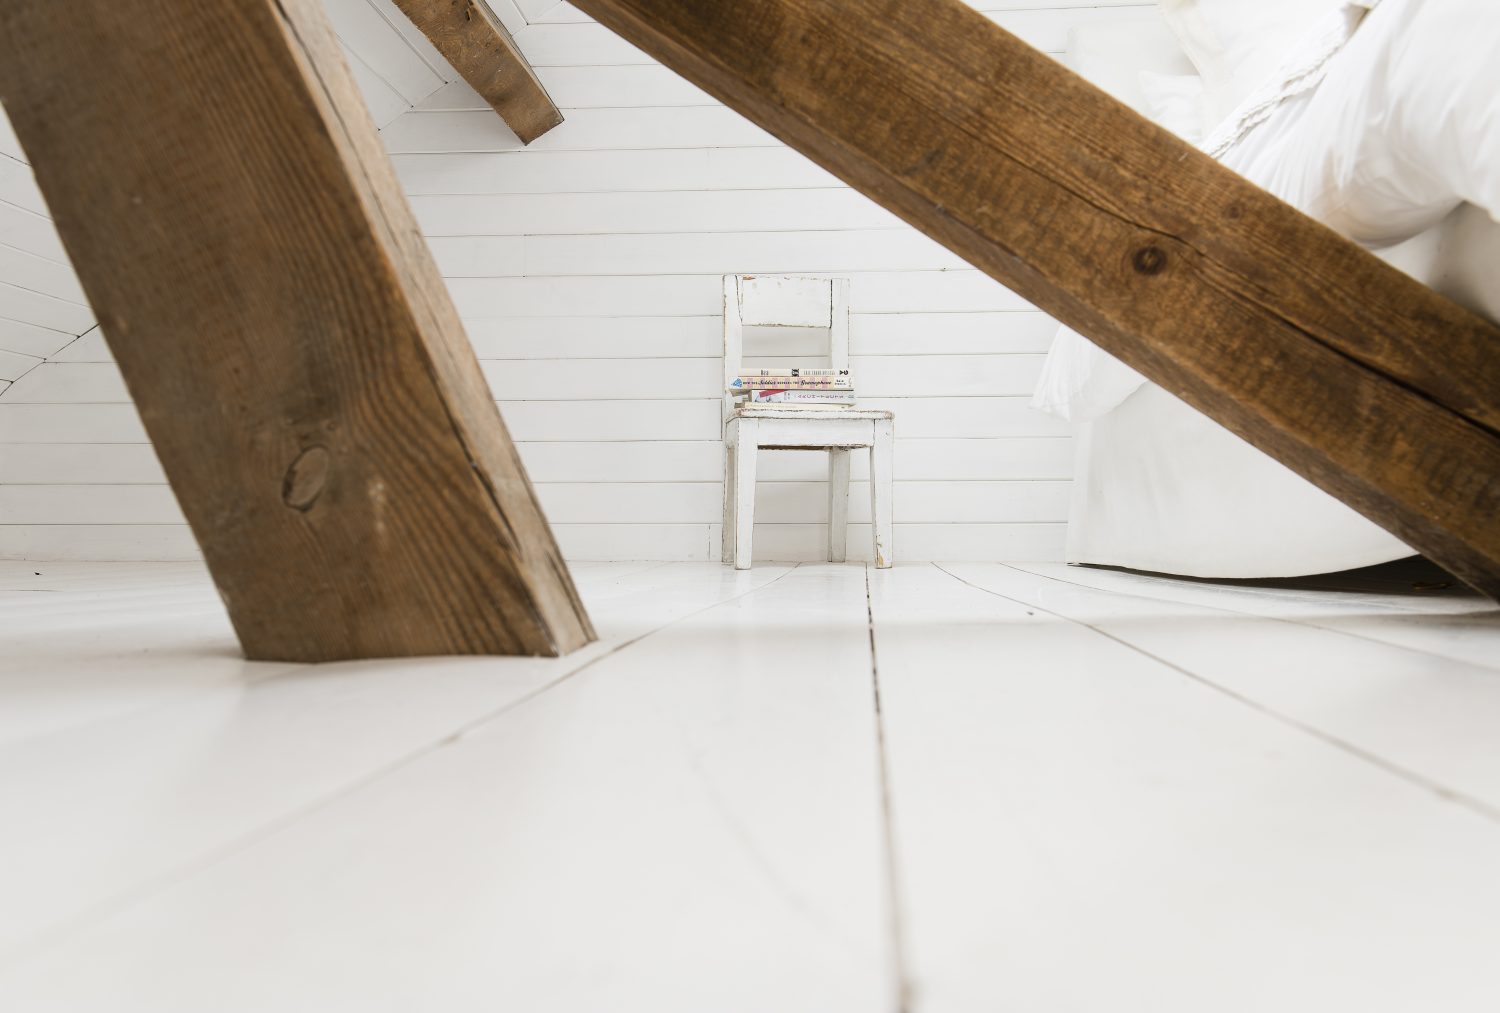 Marta created a new double bedroom in the eaves of the house, large and airy with light pouring through Velux windows, accessed by this ship-like ladder